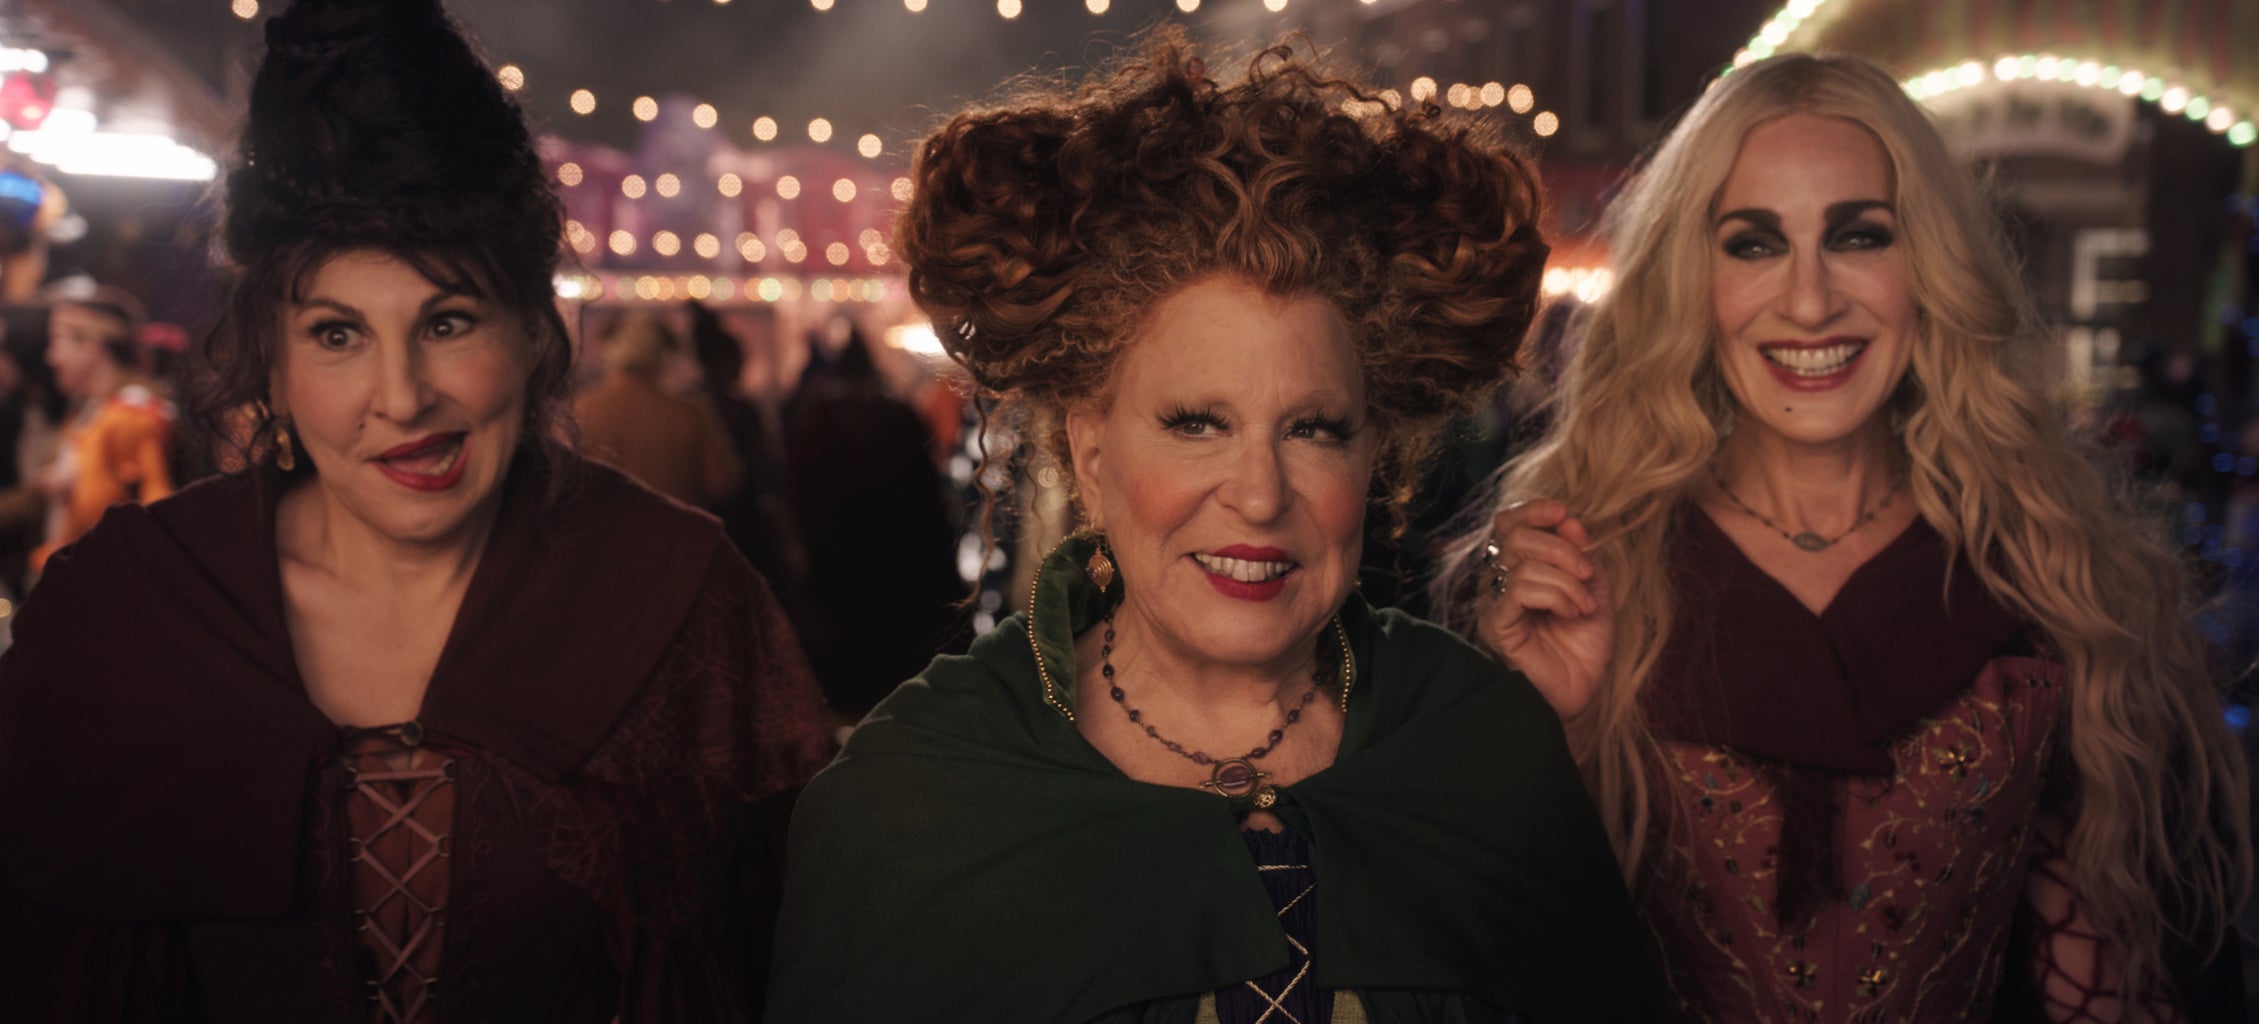 Kathy Najimy as Mary Sanderson, Bette Midler as Winifred Sanderson, and Sarah Jessica Parker as Sarah Sanderson in Disney\'s live-action HOCUS POCUS 2